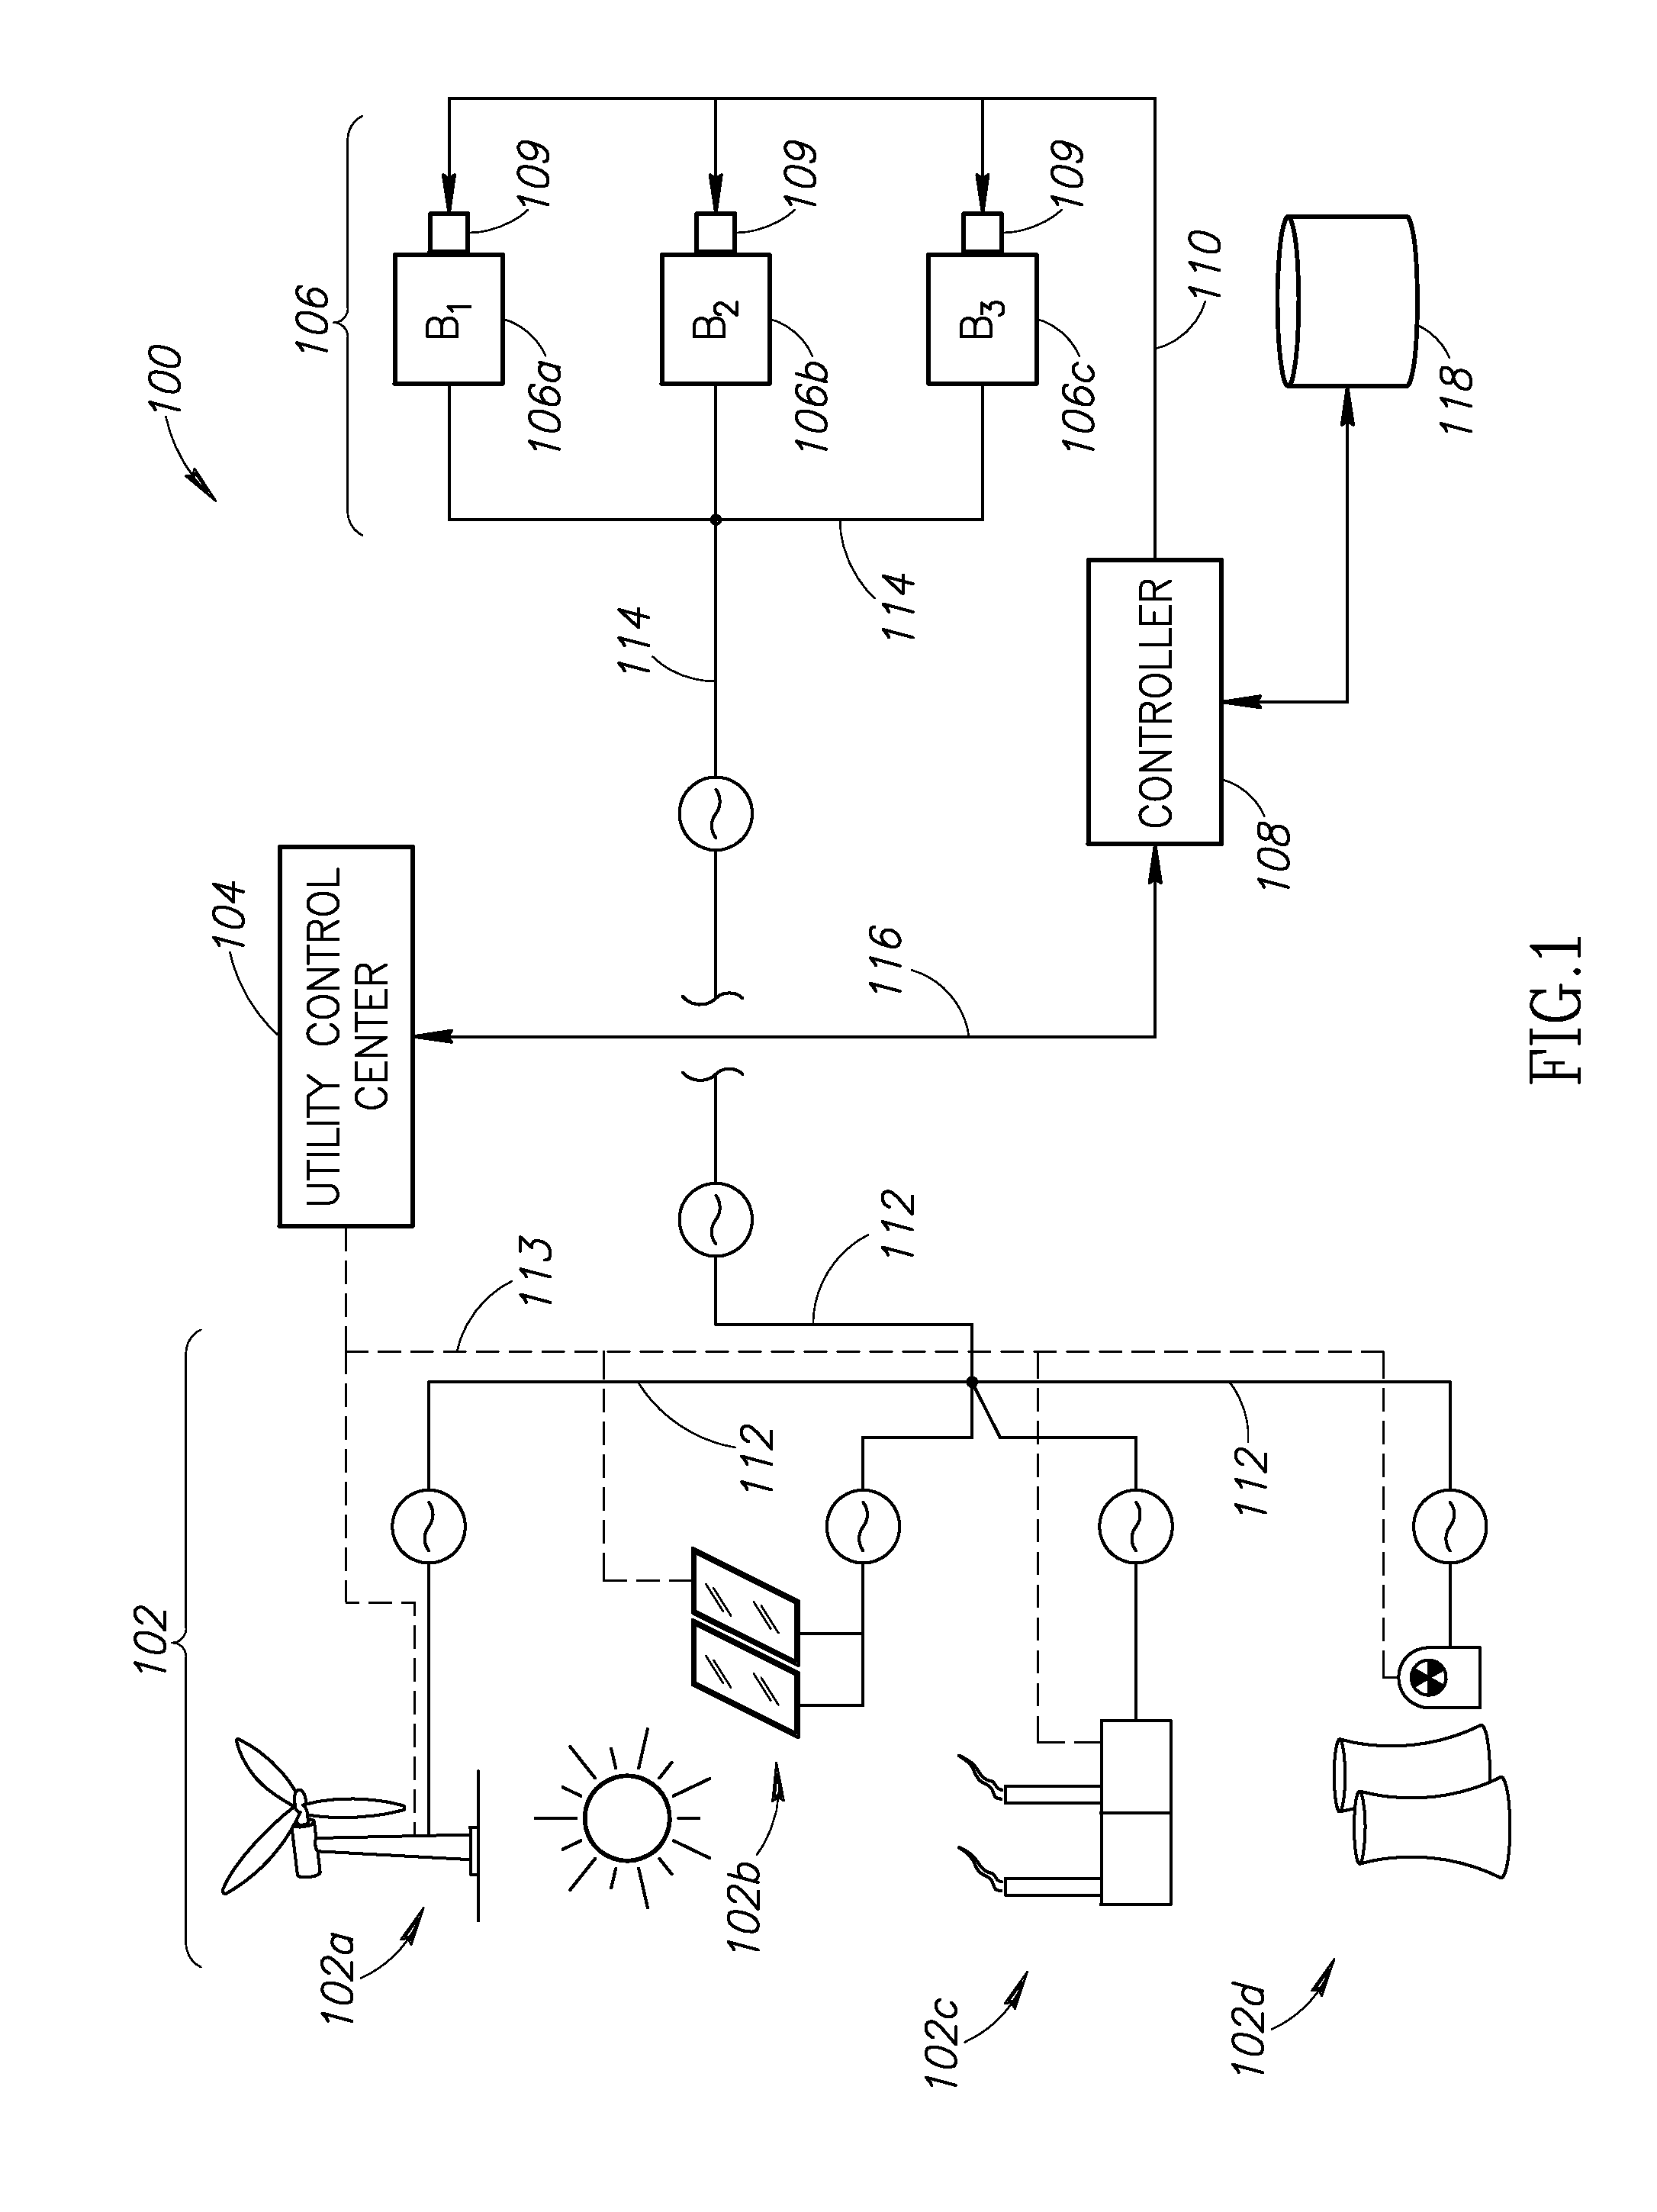 Systems and methods for balancing an electrical grid with networked buildings